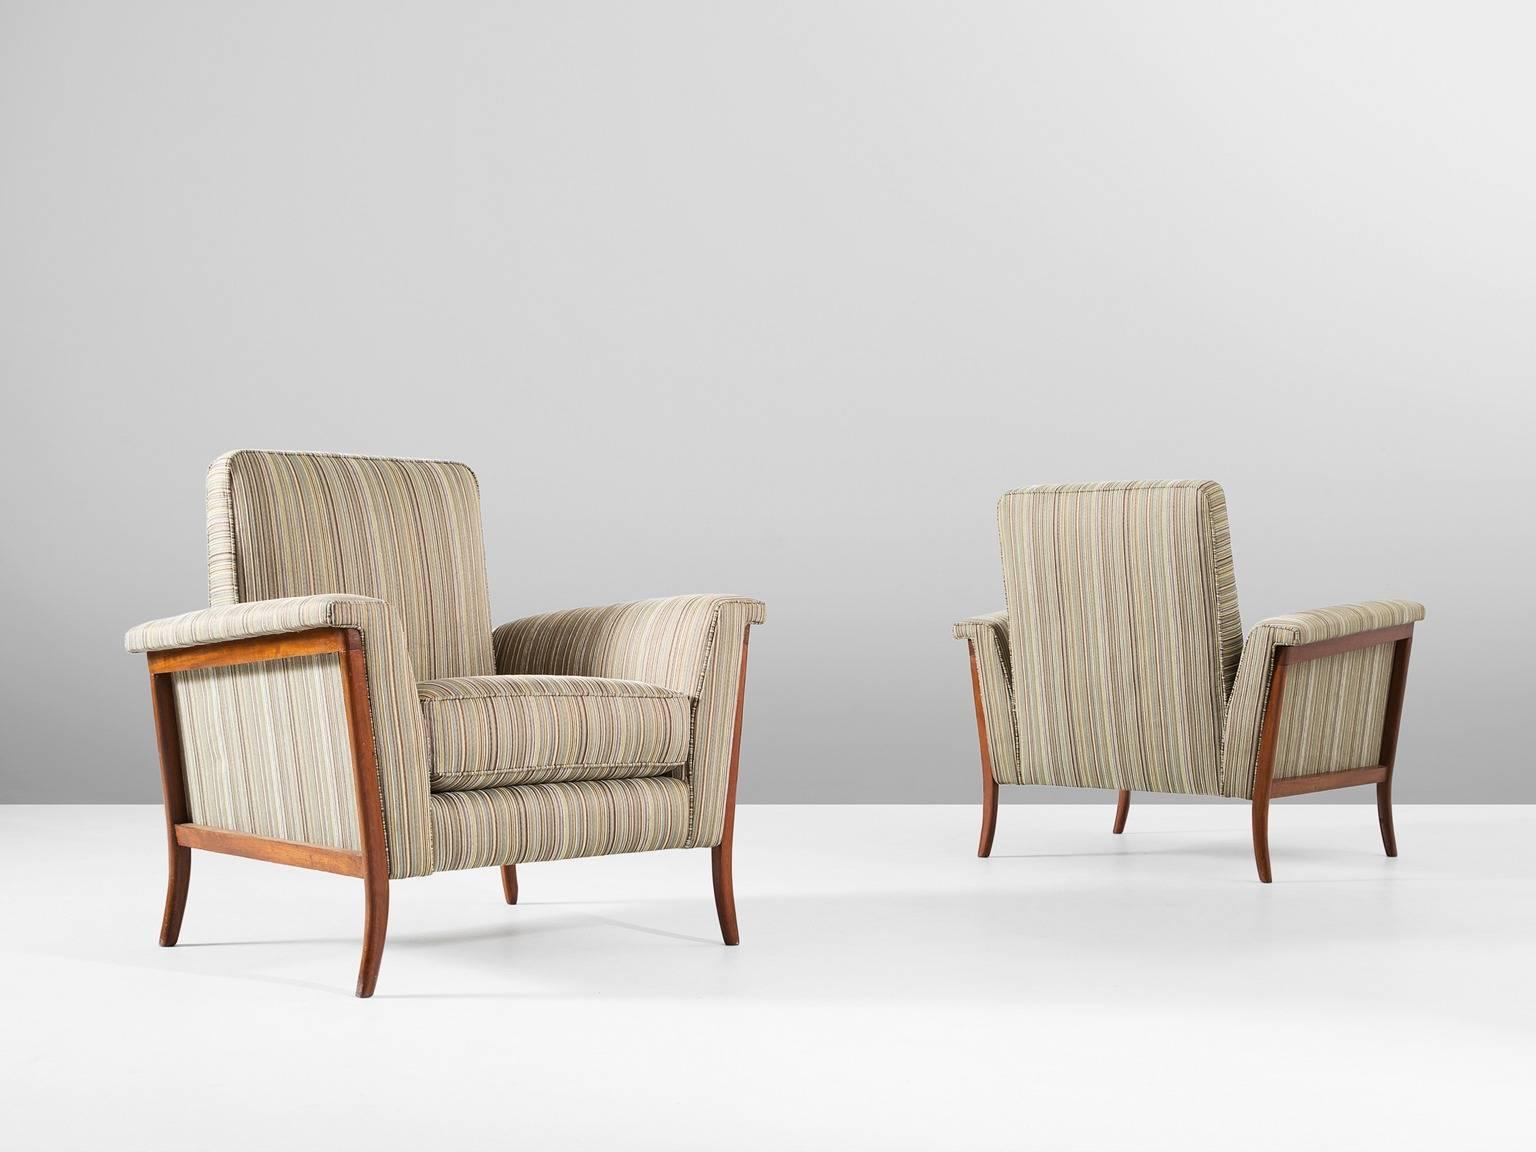 Pair of lounge chairs, in mahogany and fabric, Brazil, 1960s.

Elegant pair of Brazilian club chairs. The curved frame is made of mahogany and beautifully exposed on the outside of the shell. Due the lines the wide character of this chair is